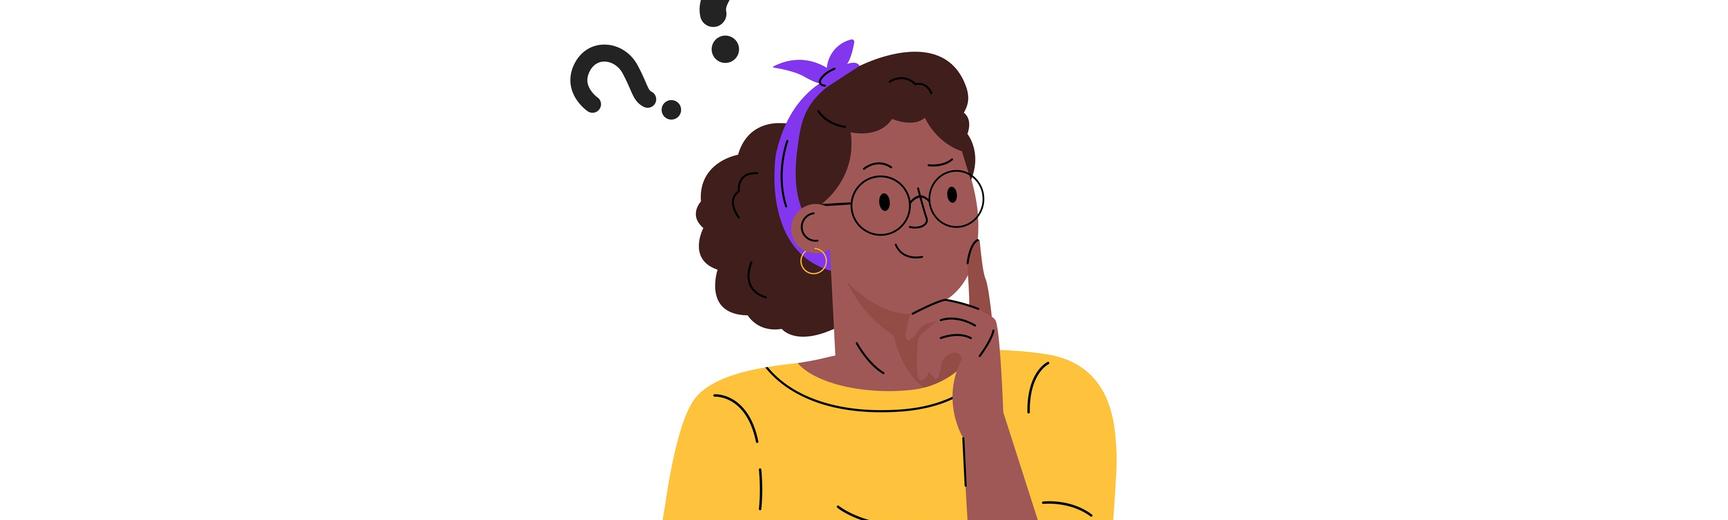 Cartoon of a woman of colour smiling thoughtfully with her head in her hands, and question marks above her head